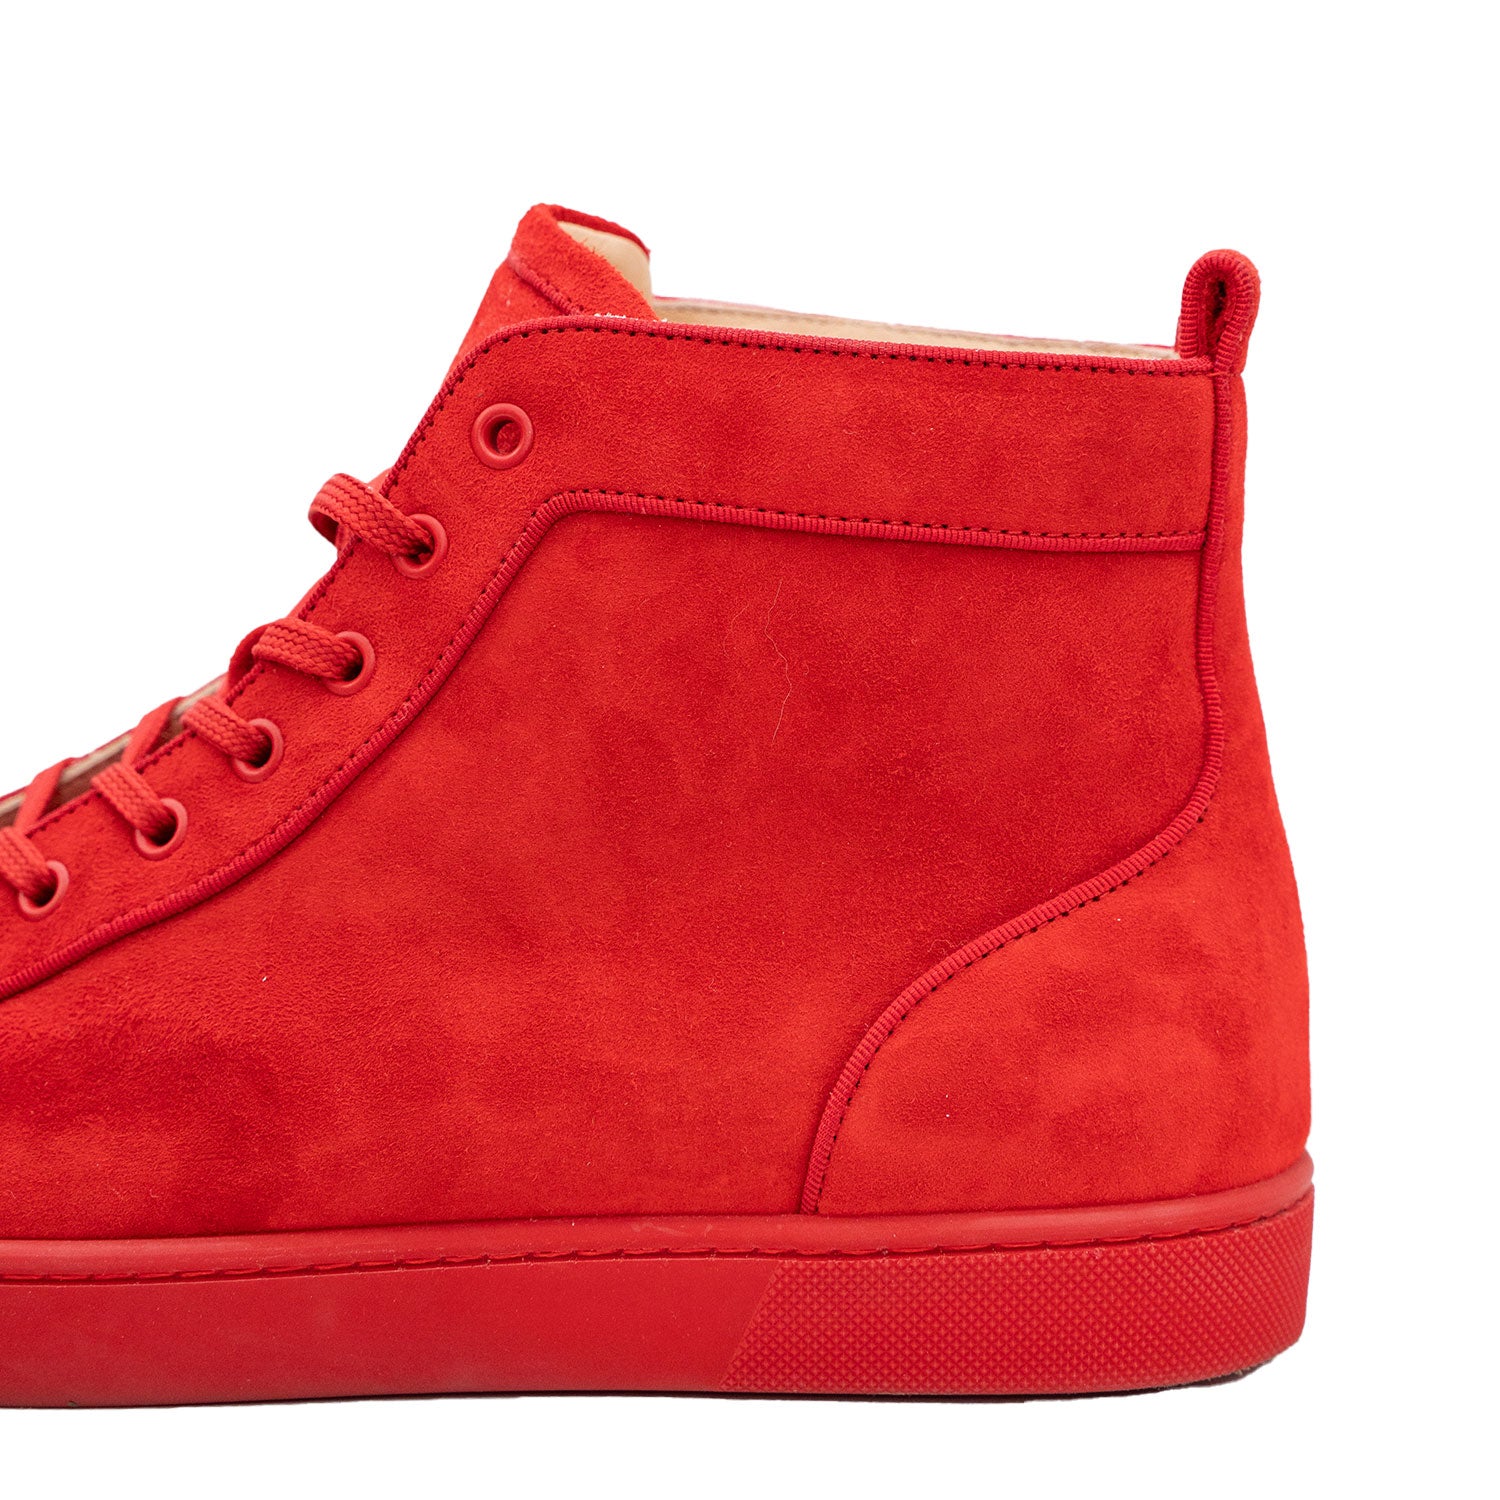 Funnyto - Low-top sneakers - Calf leather - Loubi - Kids - Christian  Louboutin United States